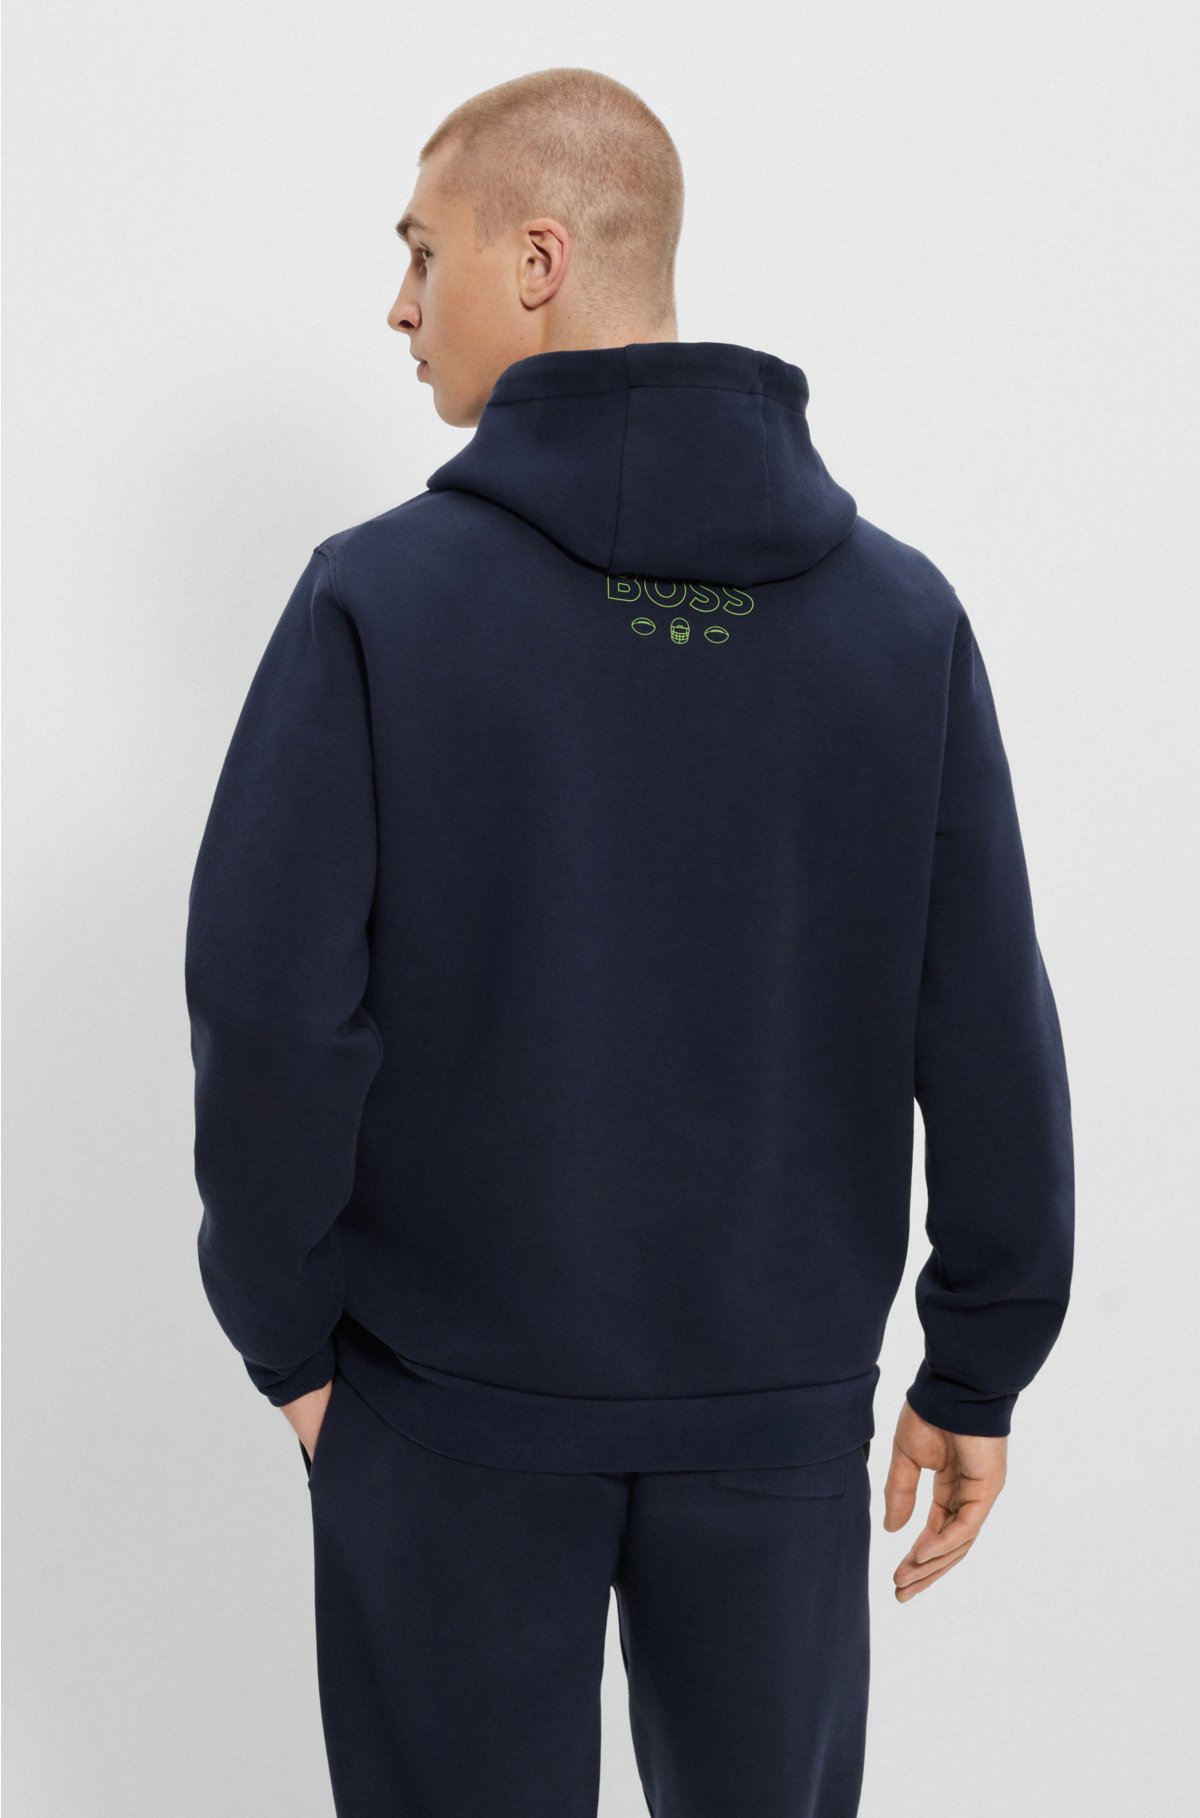  BOSS x NFL cotton-blend hoodie with collaborative branding, Seahawks